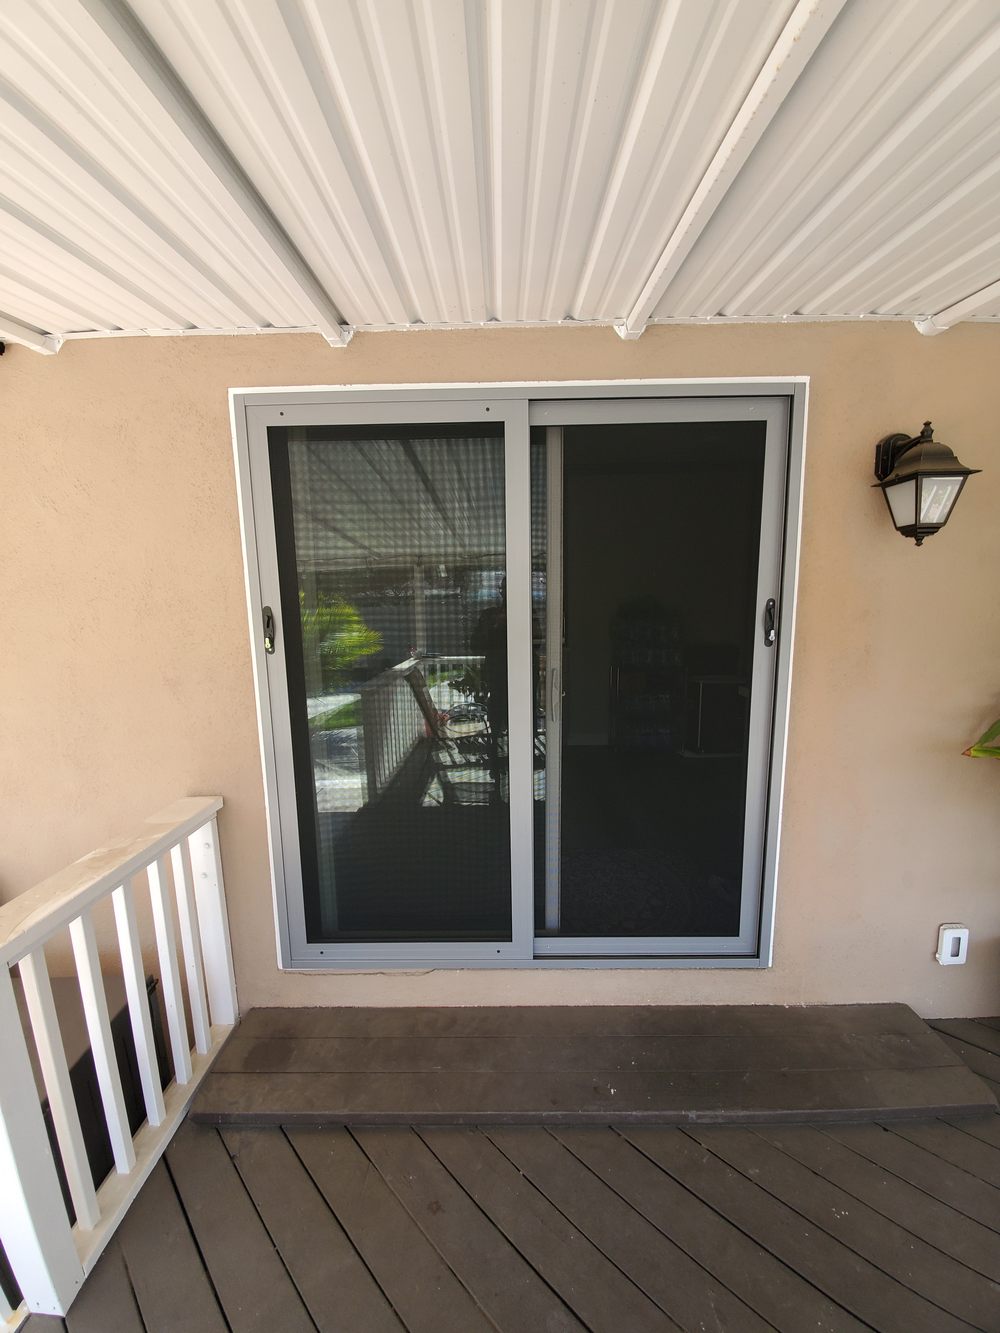 Enhancing Home Security with California Security Screens for Sliding Glass Doors